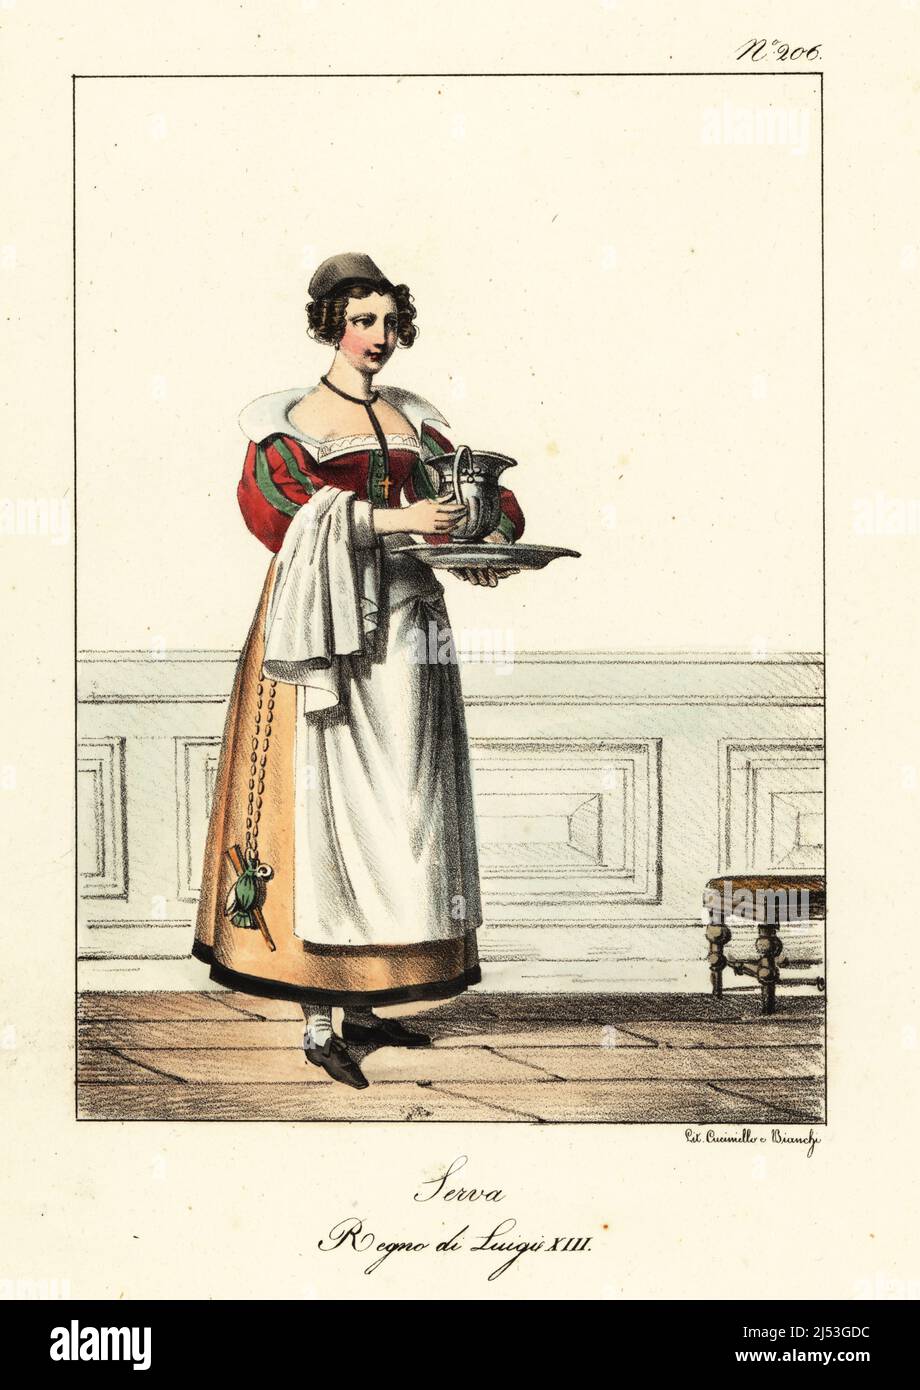 Costume of a maidservant, 17th century France. In gown with wide collar, slashed sleeves, bodice, skirts and apron, with alms bag and fan. Holding a pitcher and tray. Servante. Regne de Louis XIII, Handcoloured lithograph by Lorenzo Bianchi and Domenico Cuciniello after Hippolyte Lecomte from Costumi civili e militari della monarchia francese dal 1200 al 1820, Naples, 1825. Italian edition of Lecomte’s Civilian and military costumes of the French monarchy from 1200 to 1820. Stock Photo